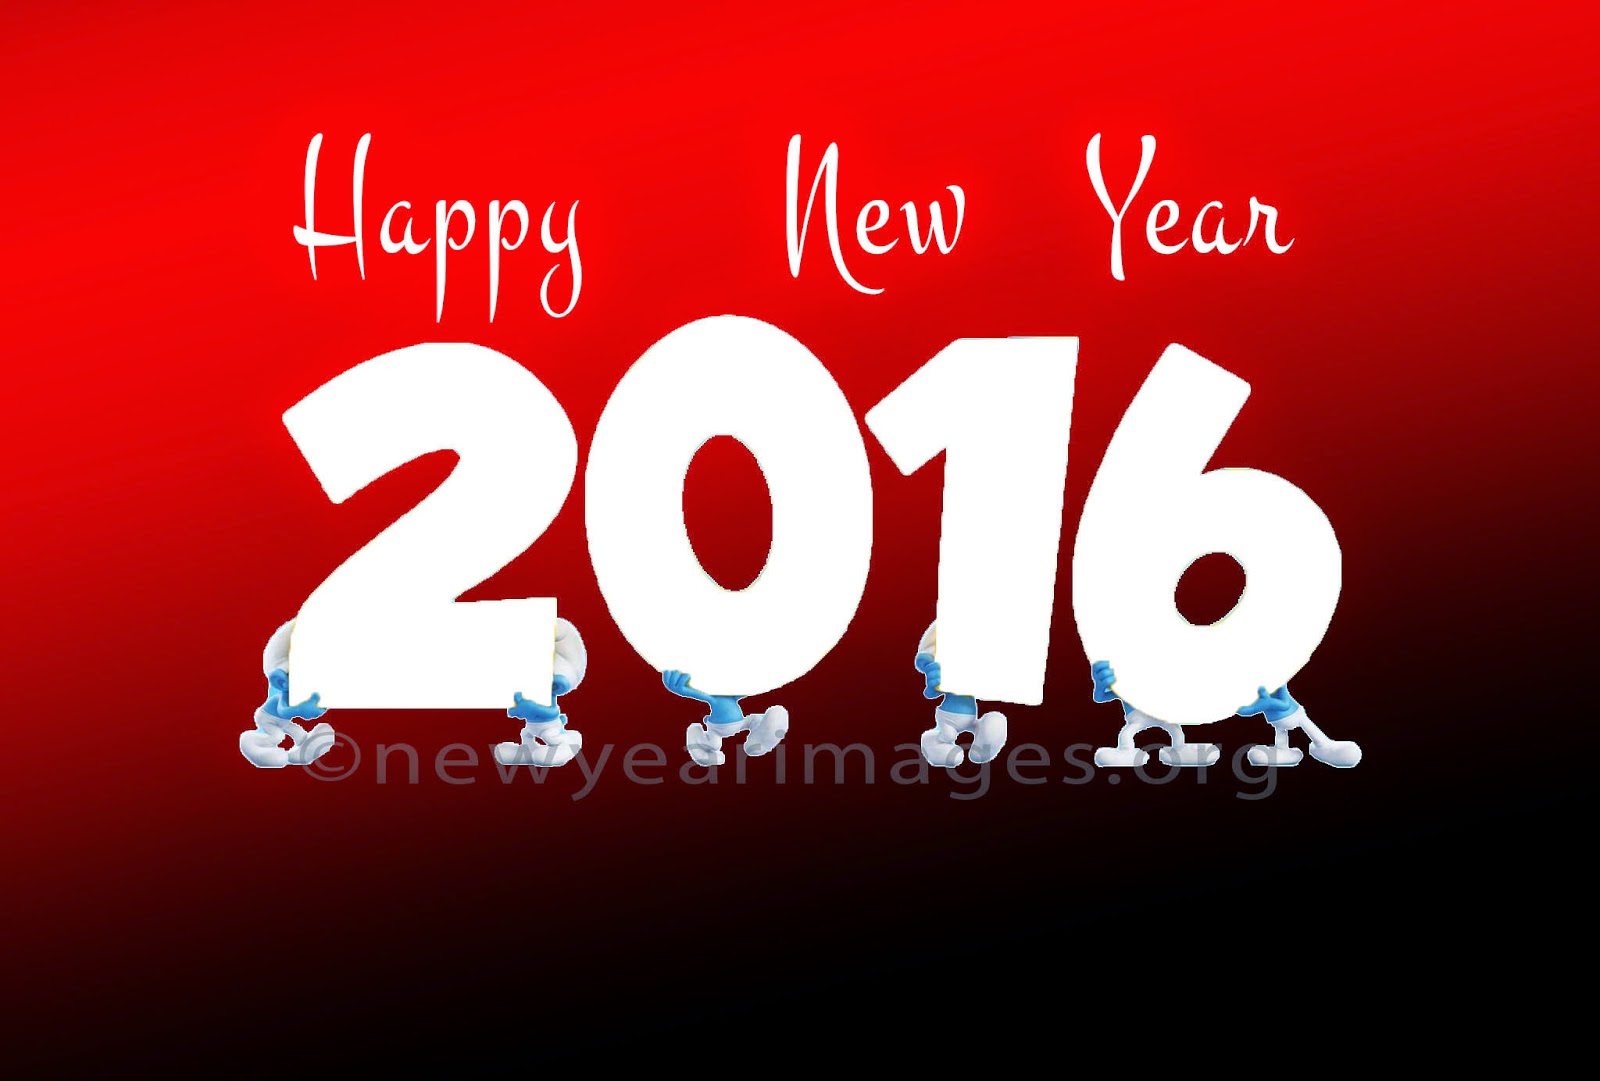 Happy New Year 2016 Wishes